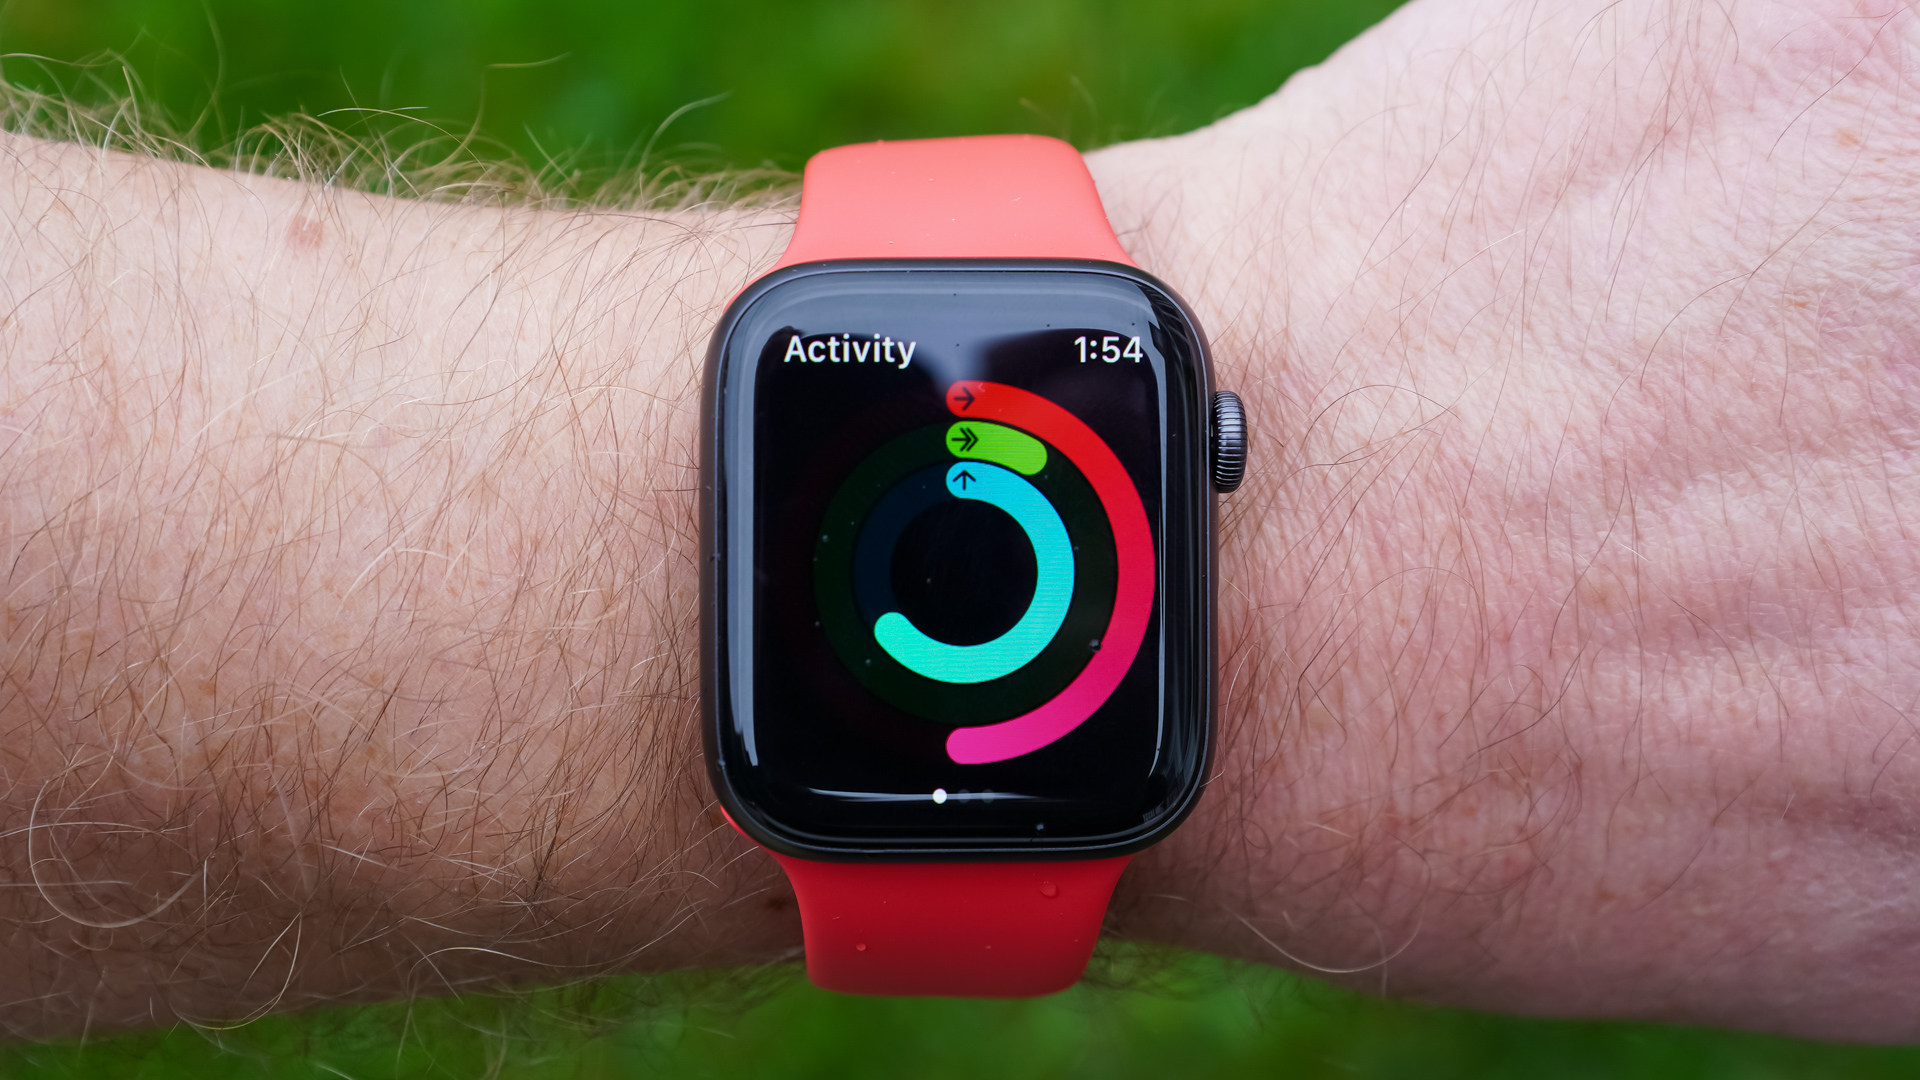 The Apple Watch SE displays their activity rings on the user's wrist.